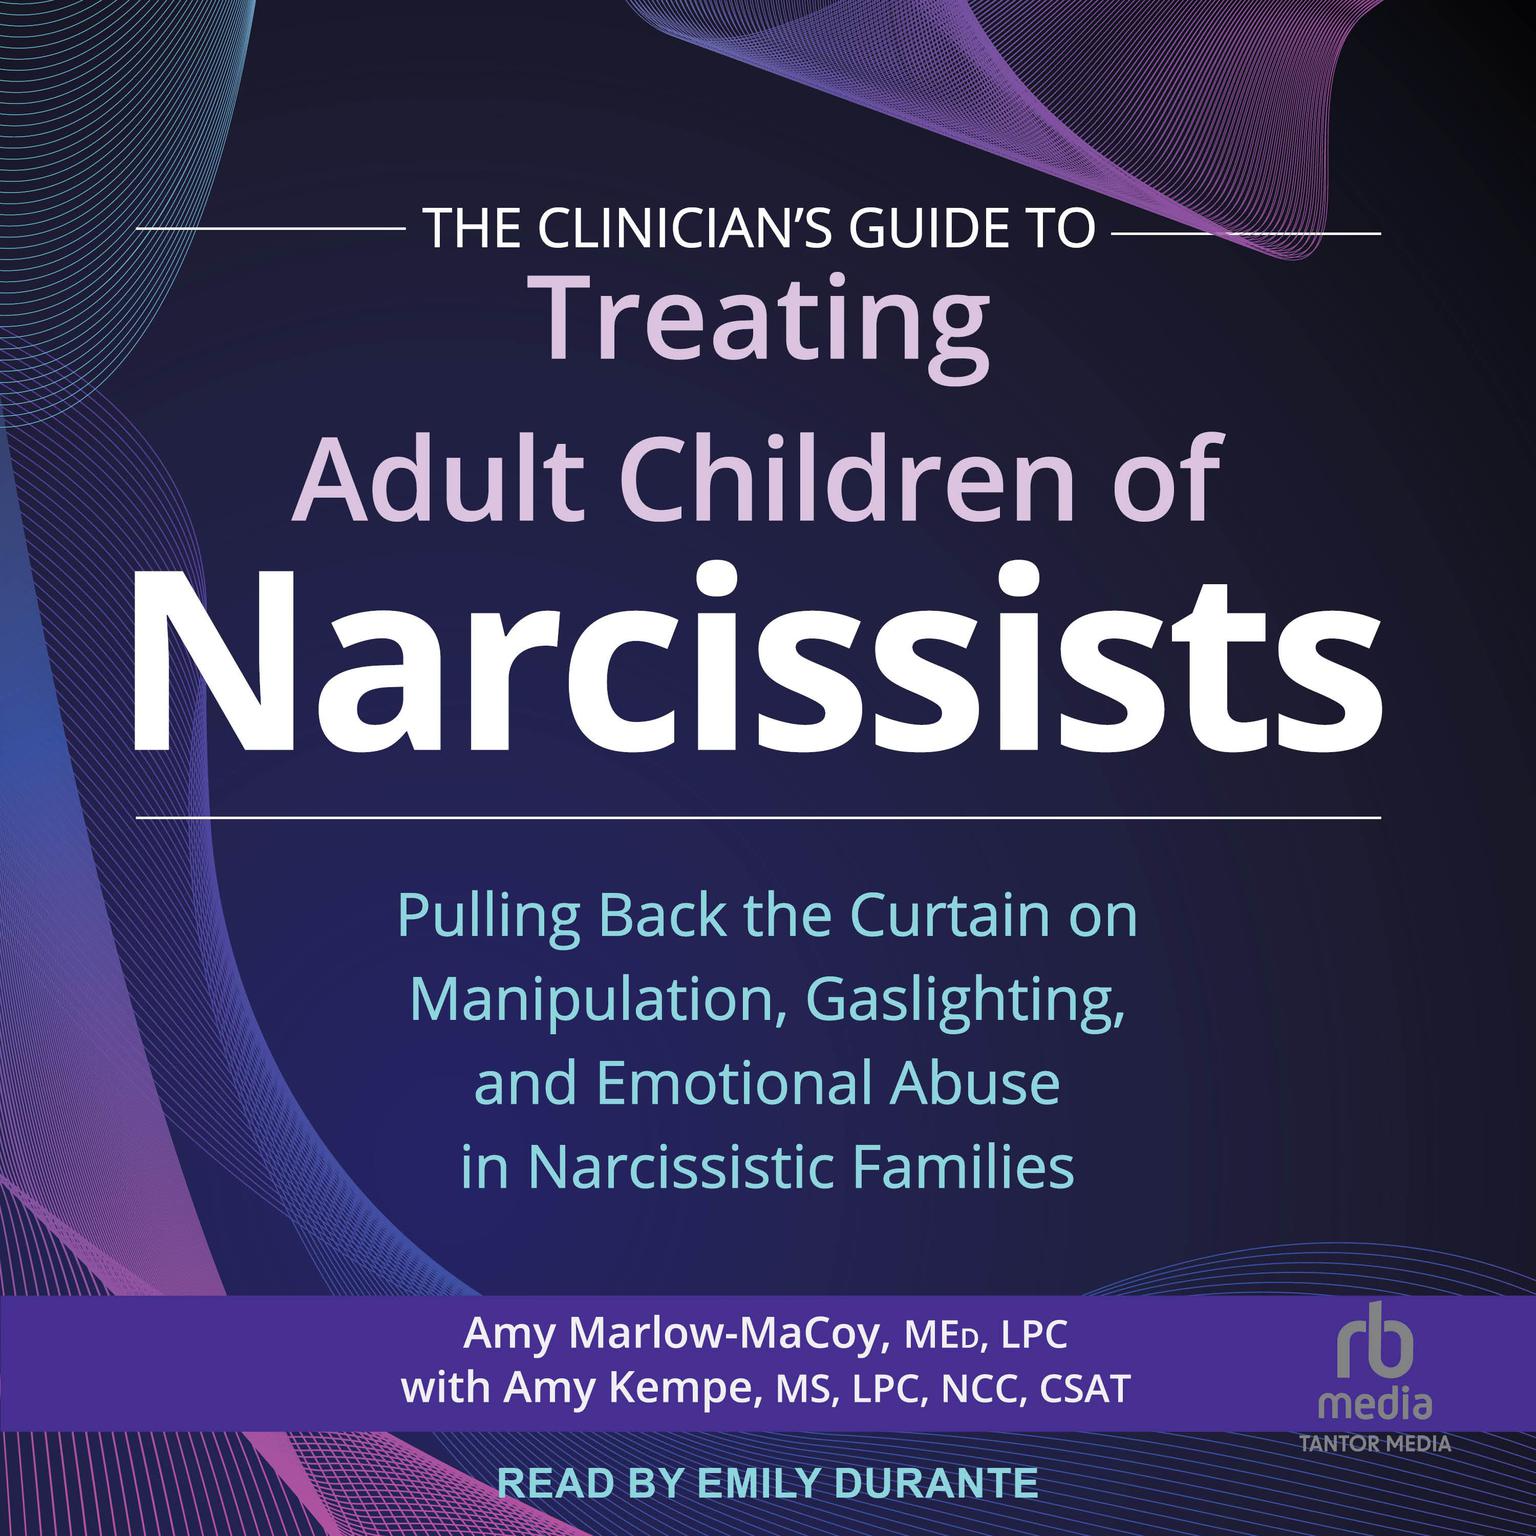 The Clinicians Guide to Treating Adult Children of Narcissists: Pulling Back the Curtain on Manipulation, Gaslighting, and Emotional Abuse in Narcissistic Families Audiobook, by Amy Marlow-MaCoy, Med, LPC